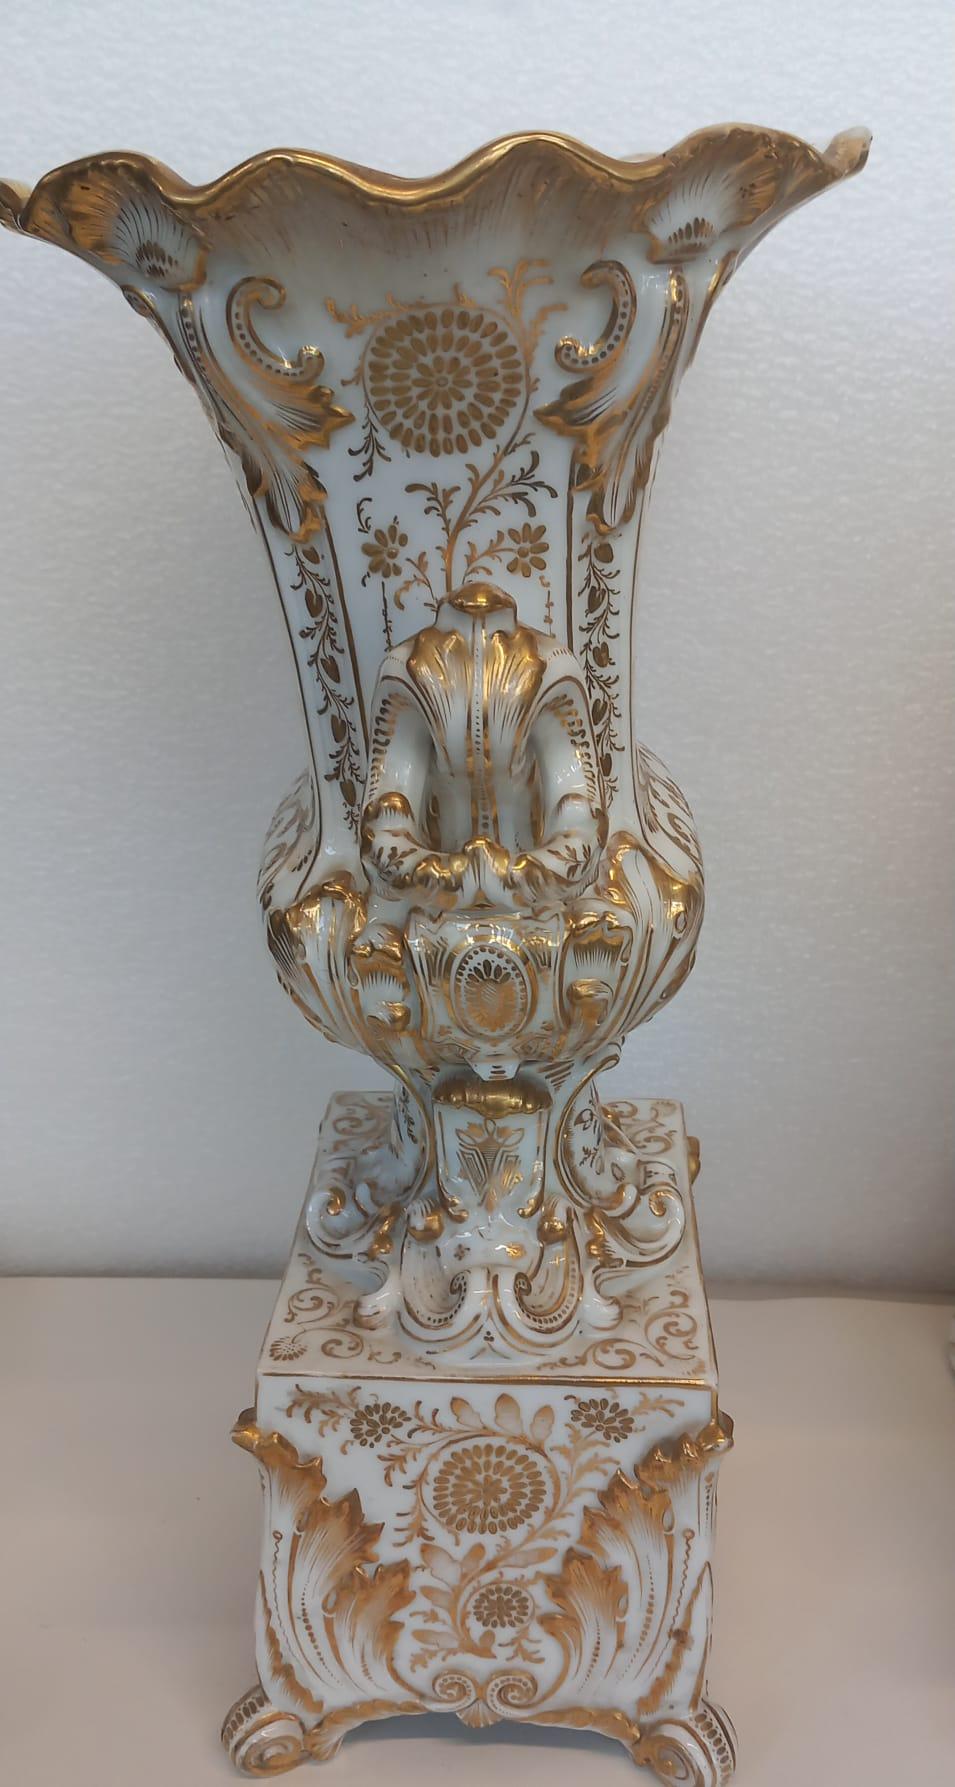 An elegant mantle piece clock with its accompanying vases made in Paris circa 1860. Very much in the Jacob Petit style and most probably from his factory, each piece is elaborately gilded and hand painted with cartouches of flowers.
The scene is a